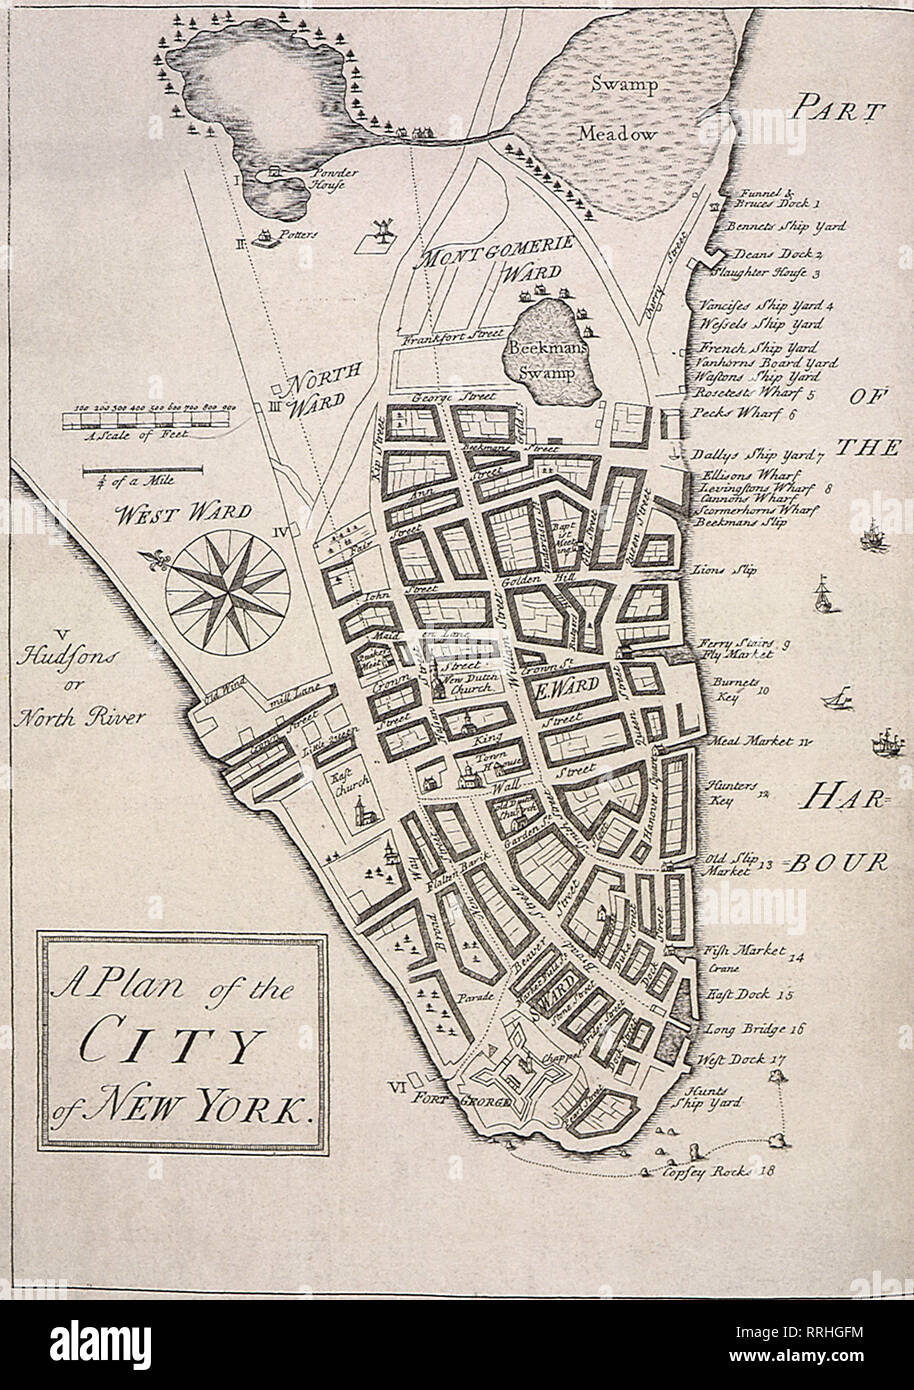 Plan of New York City  about 1740. Stock Photo